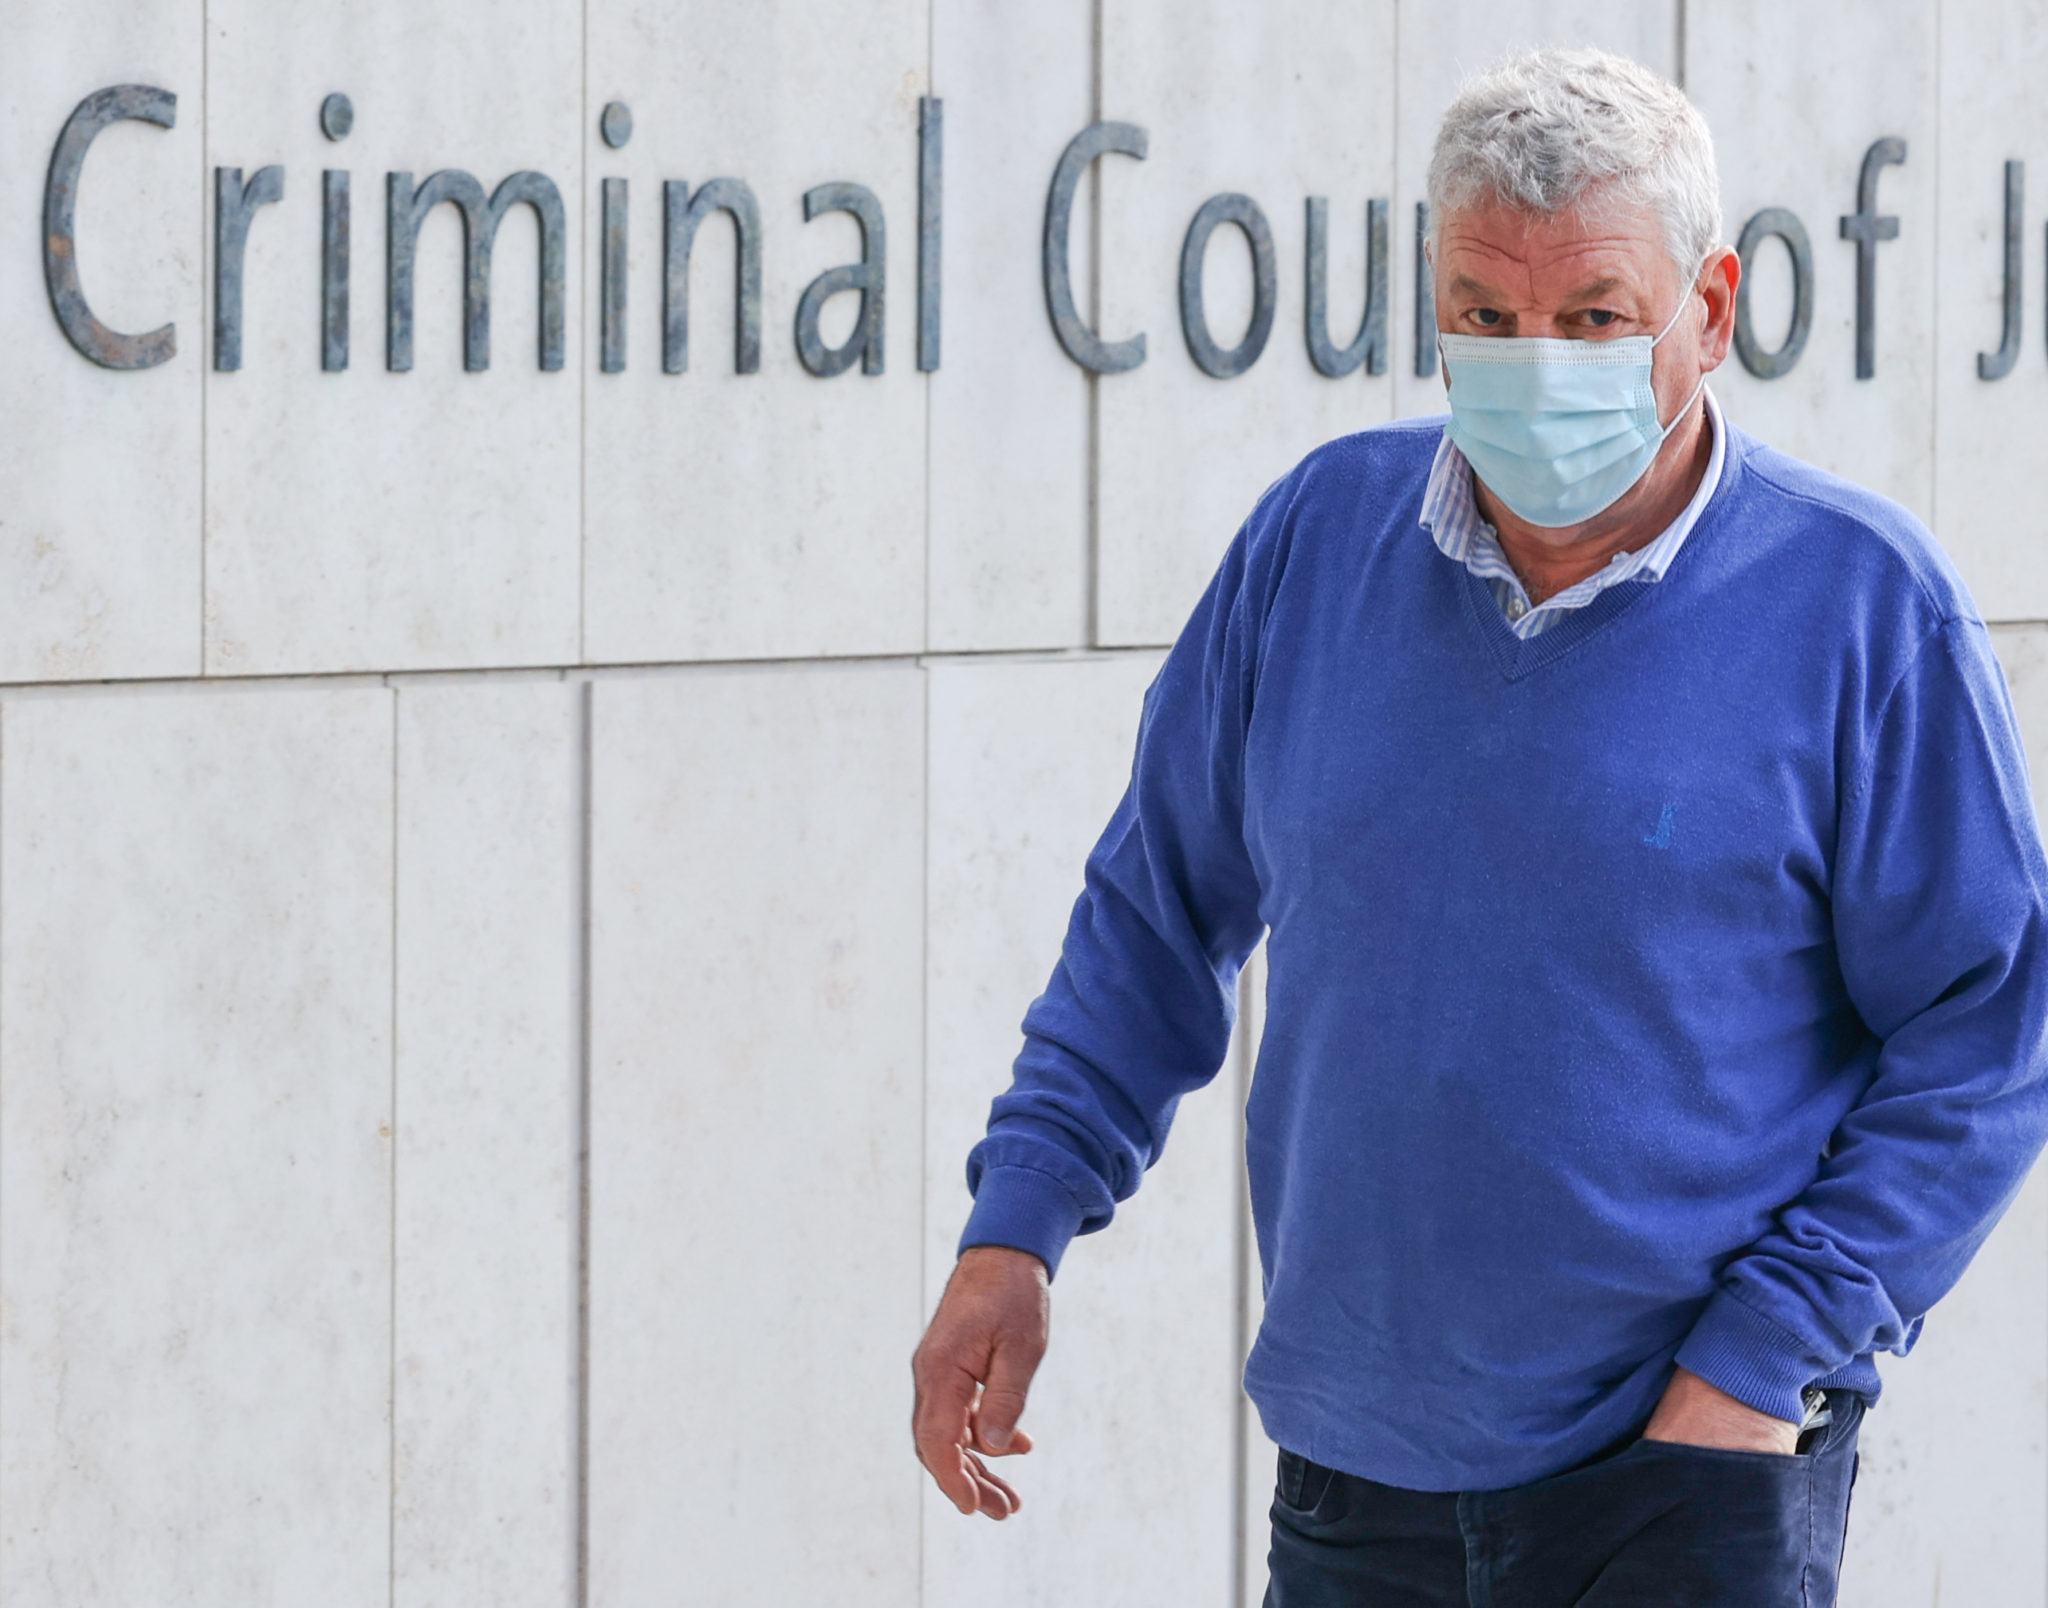 Luke O’Reilly of Mullahoran Lower, Kilcogy, Co Cavan arriving at the Criminal Courts of Justice in Dublin where he faces trial in the Special Criminal Court with three other men accused of falsely imprisoning and causing serious harm to Kevin Lunney